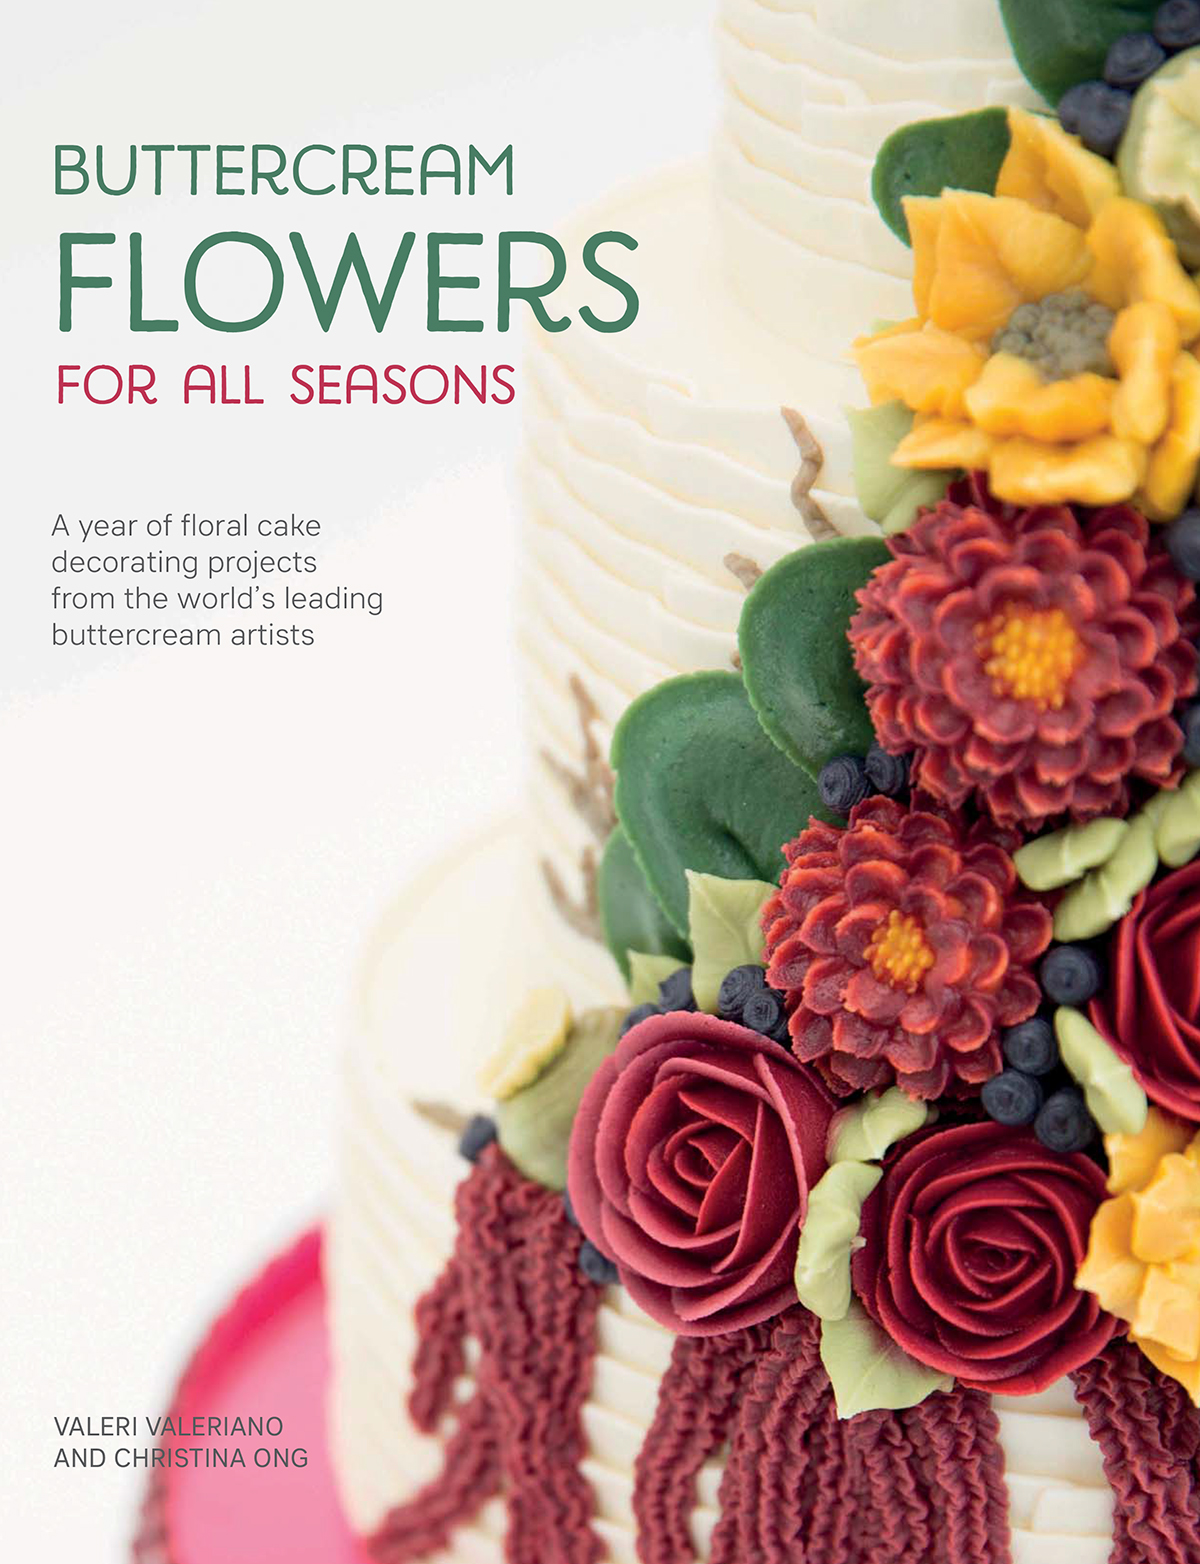 Buttercream flowers for all seasons a year of floral buttercream cake decorating projects from the worlds leading buttercream artists - image 1